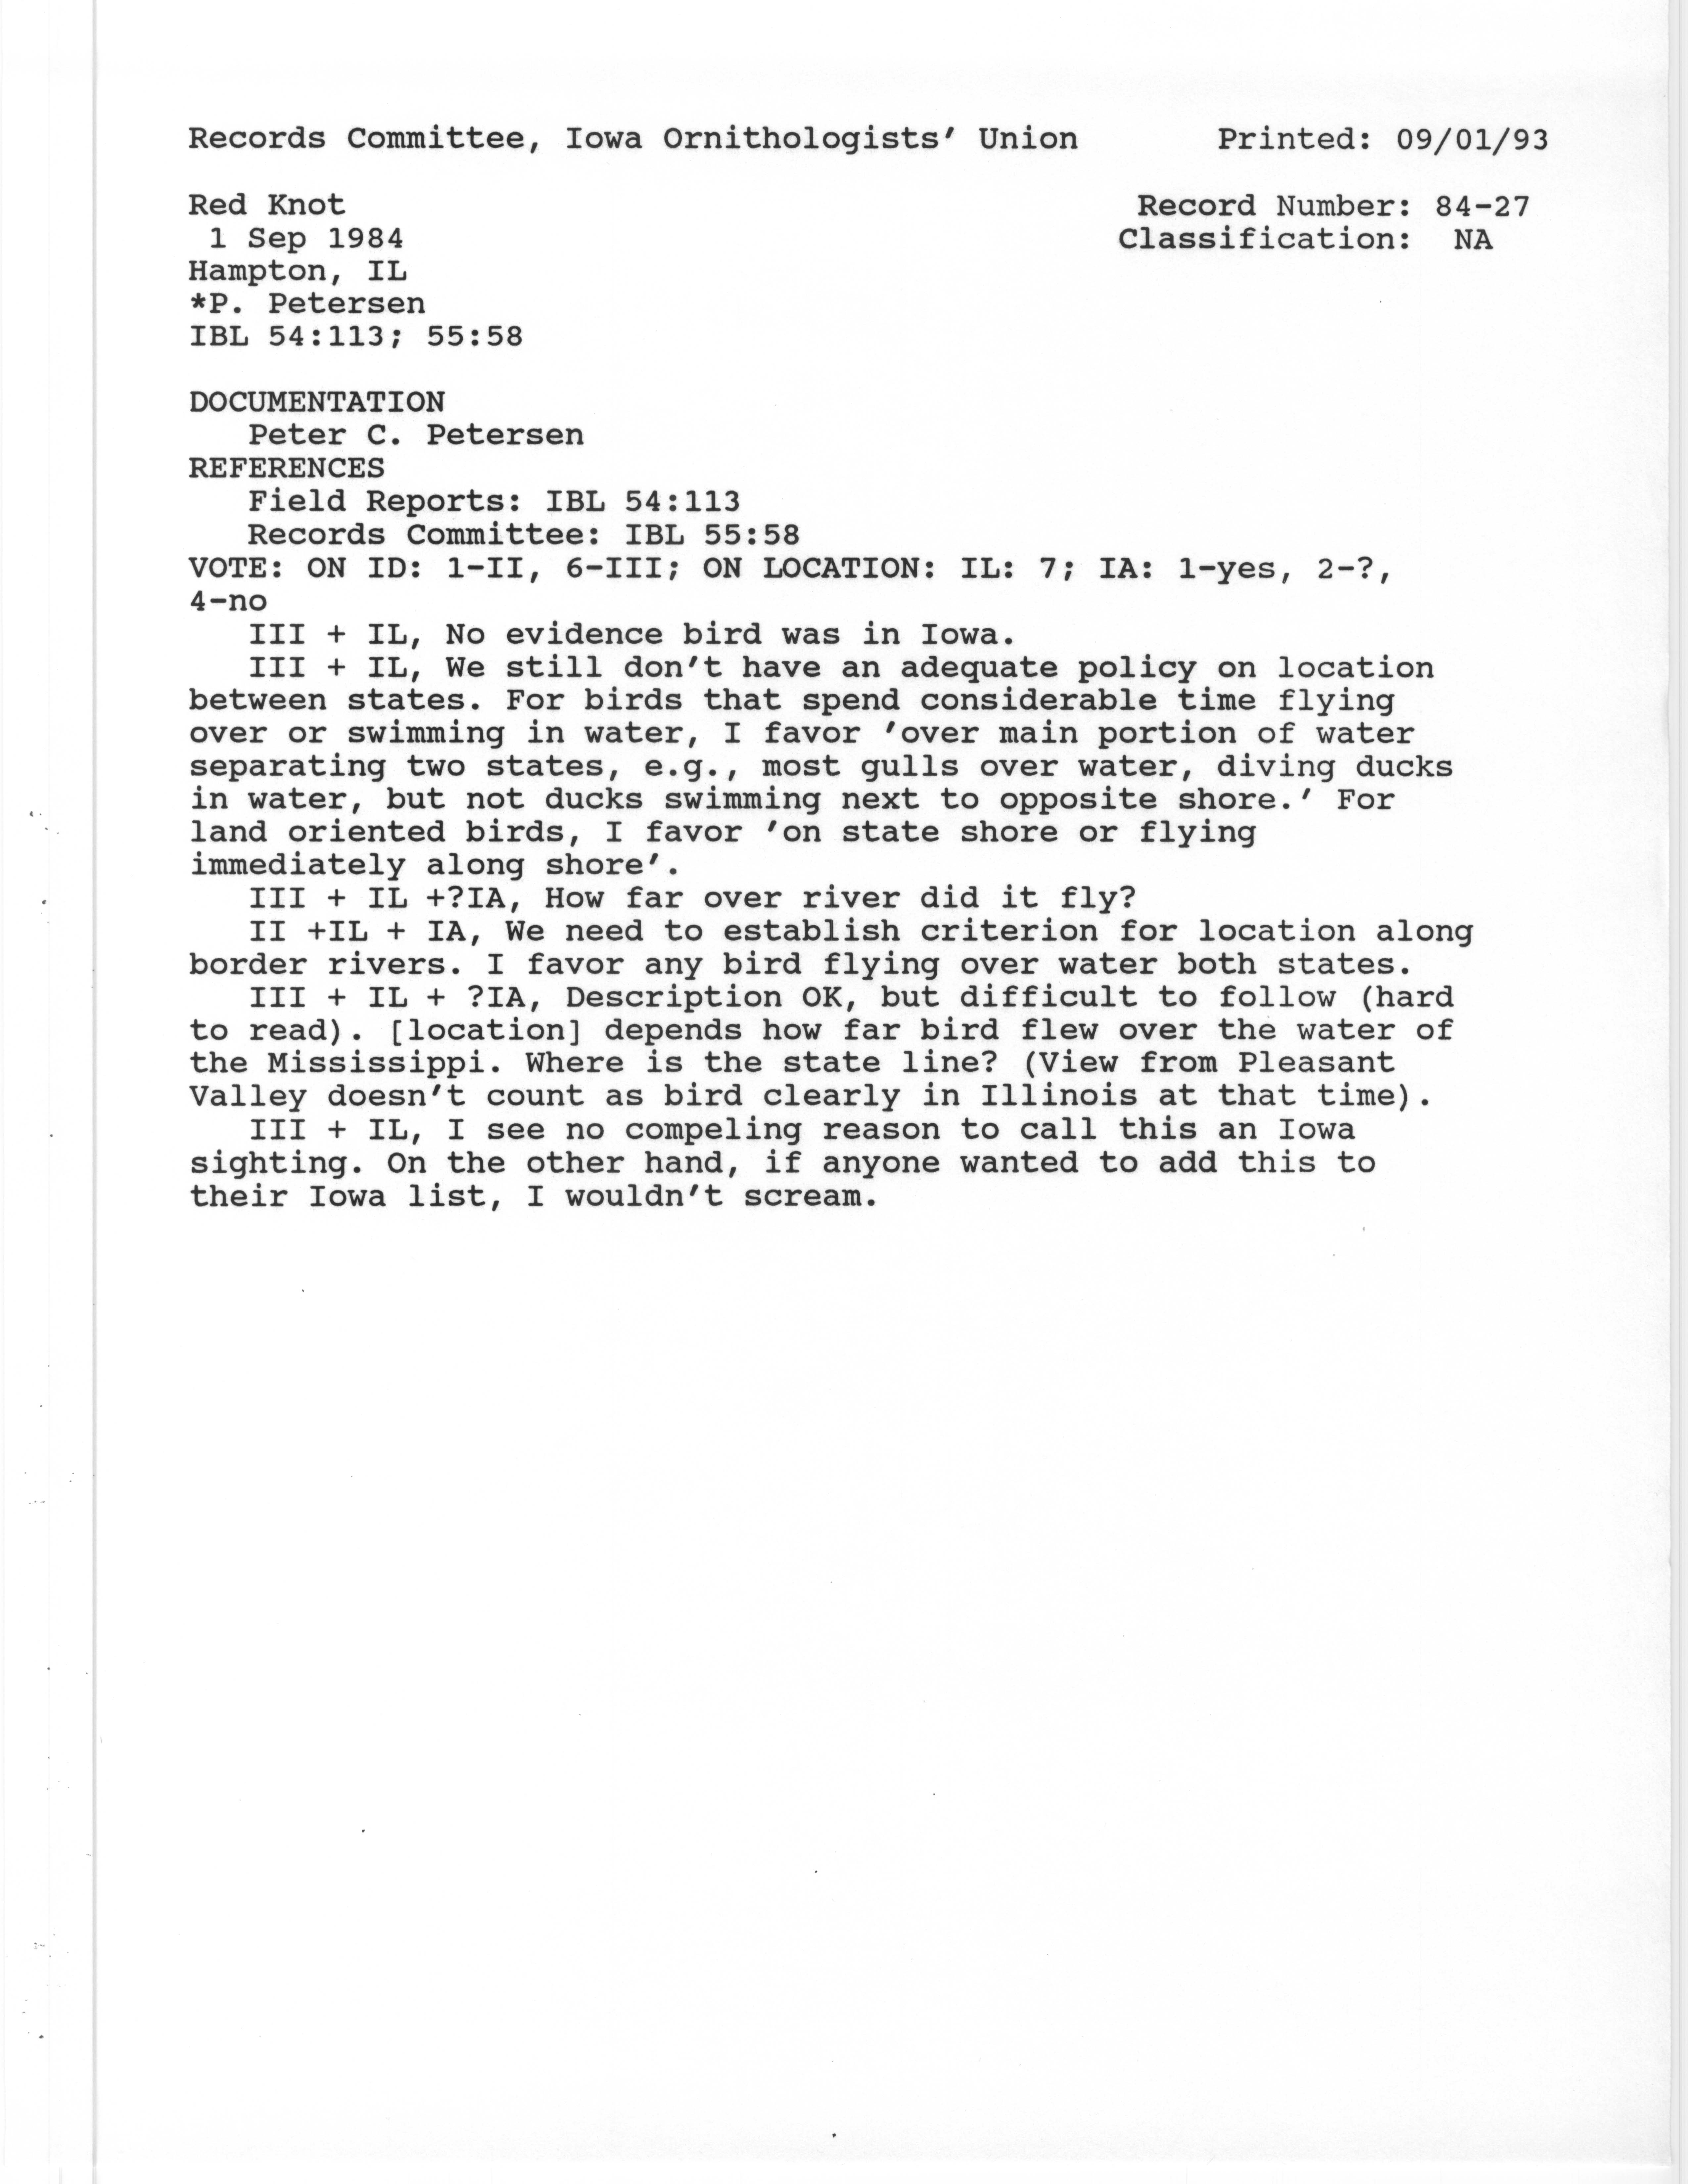 Records Committee review for rare bird sighting of Red Knot at Hampton, IL, 1984